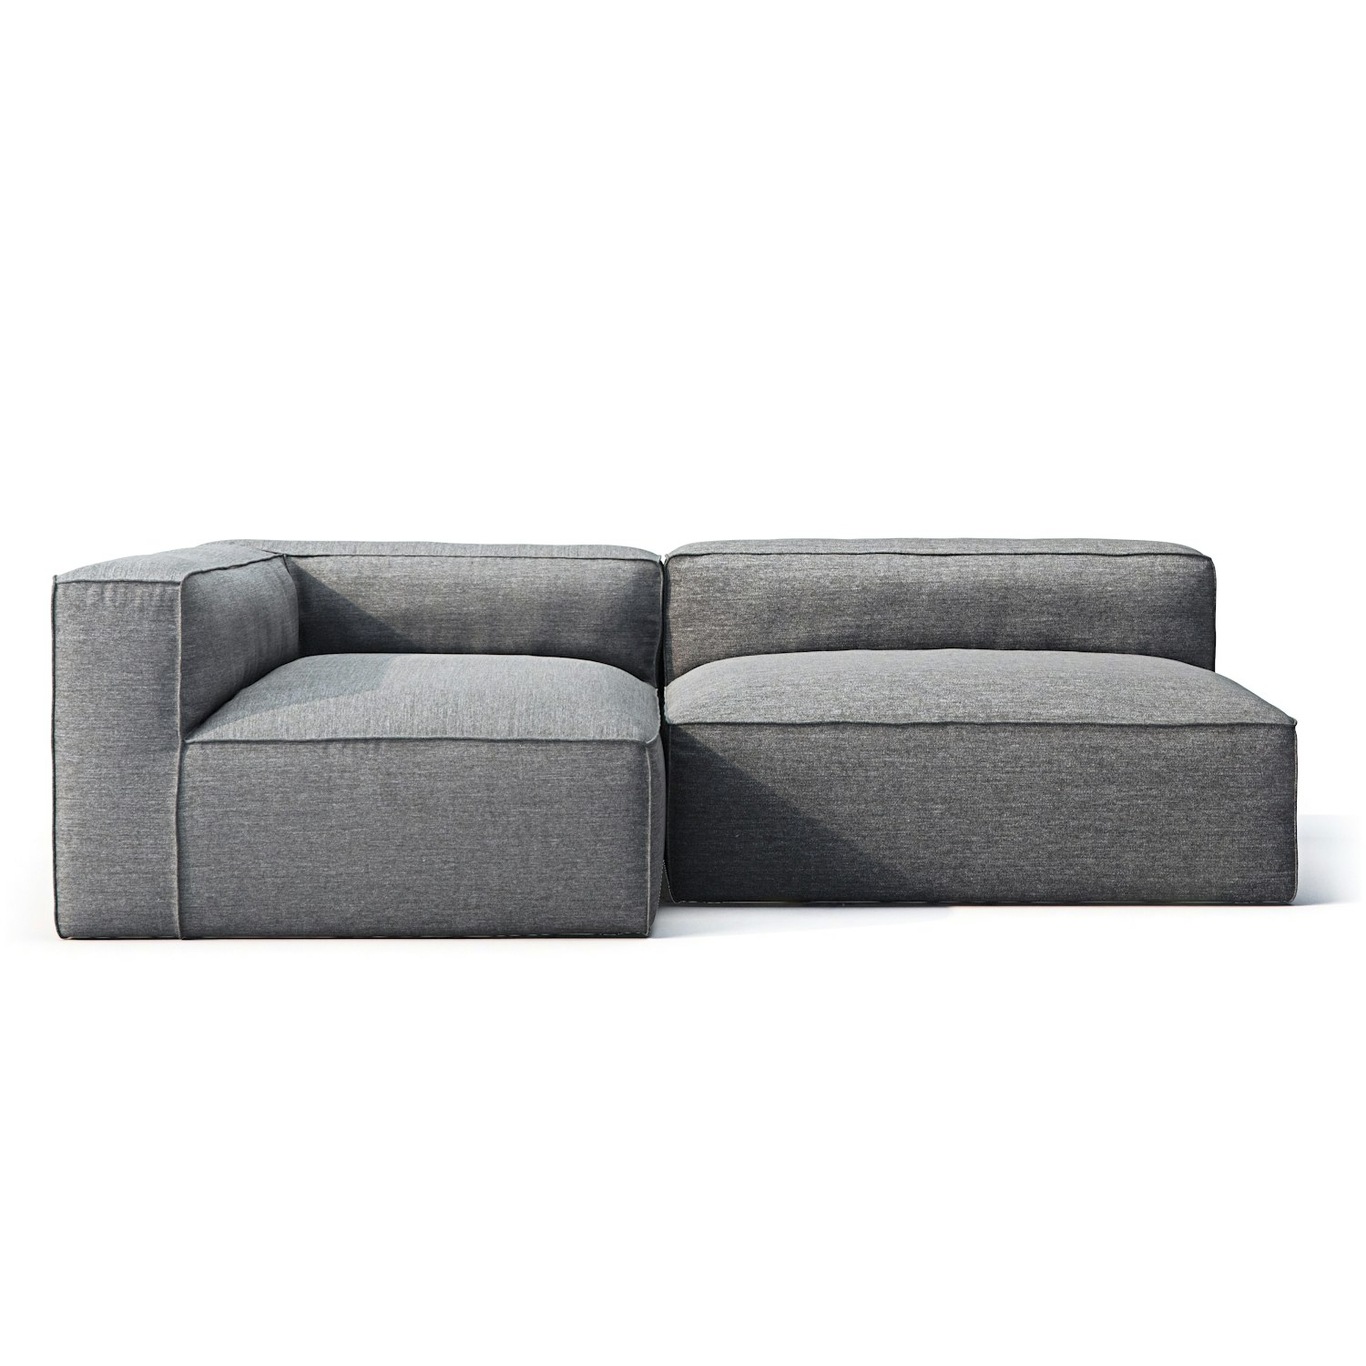 Grand Outdoor Lounge Sofa 2-Seater Left, Charcoal Chiné